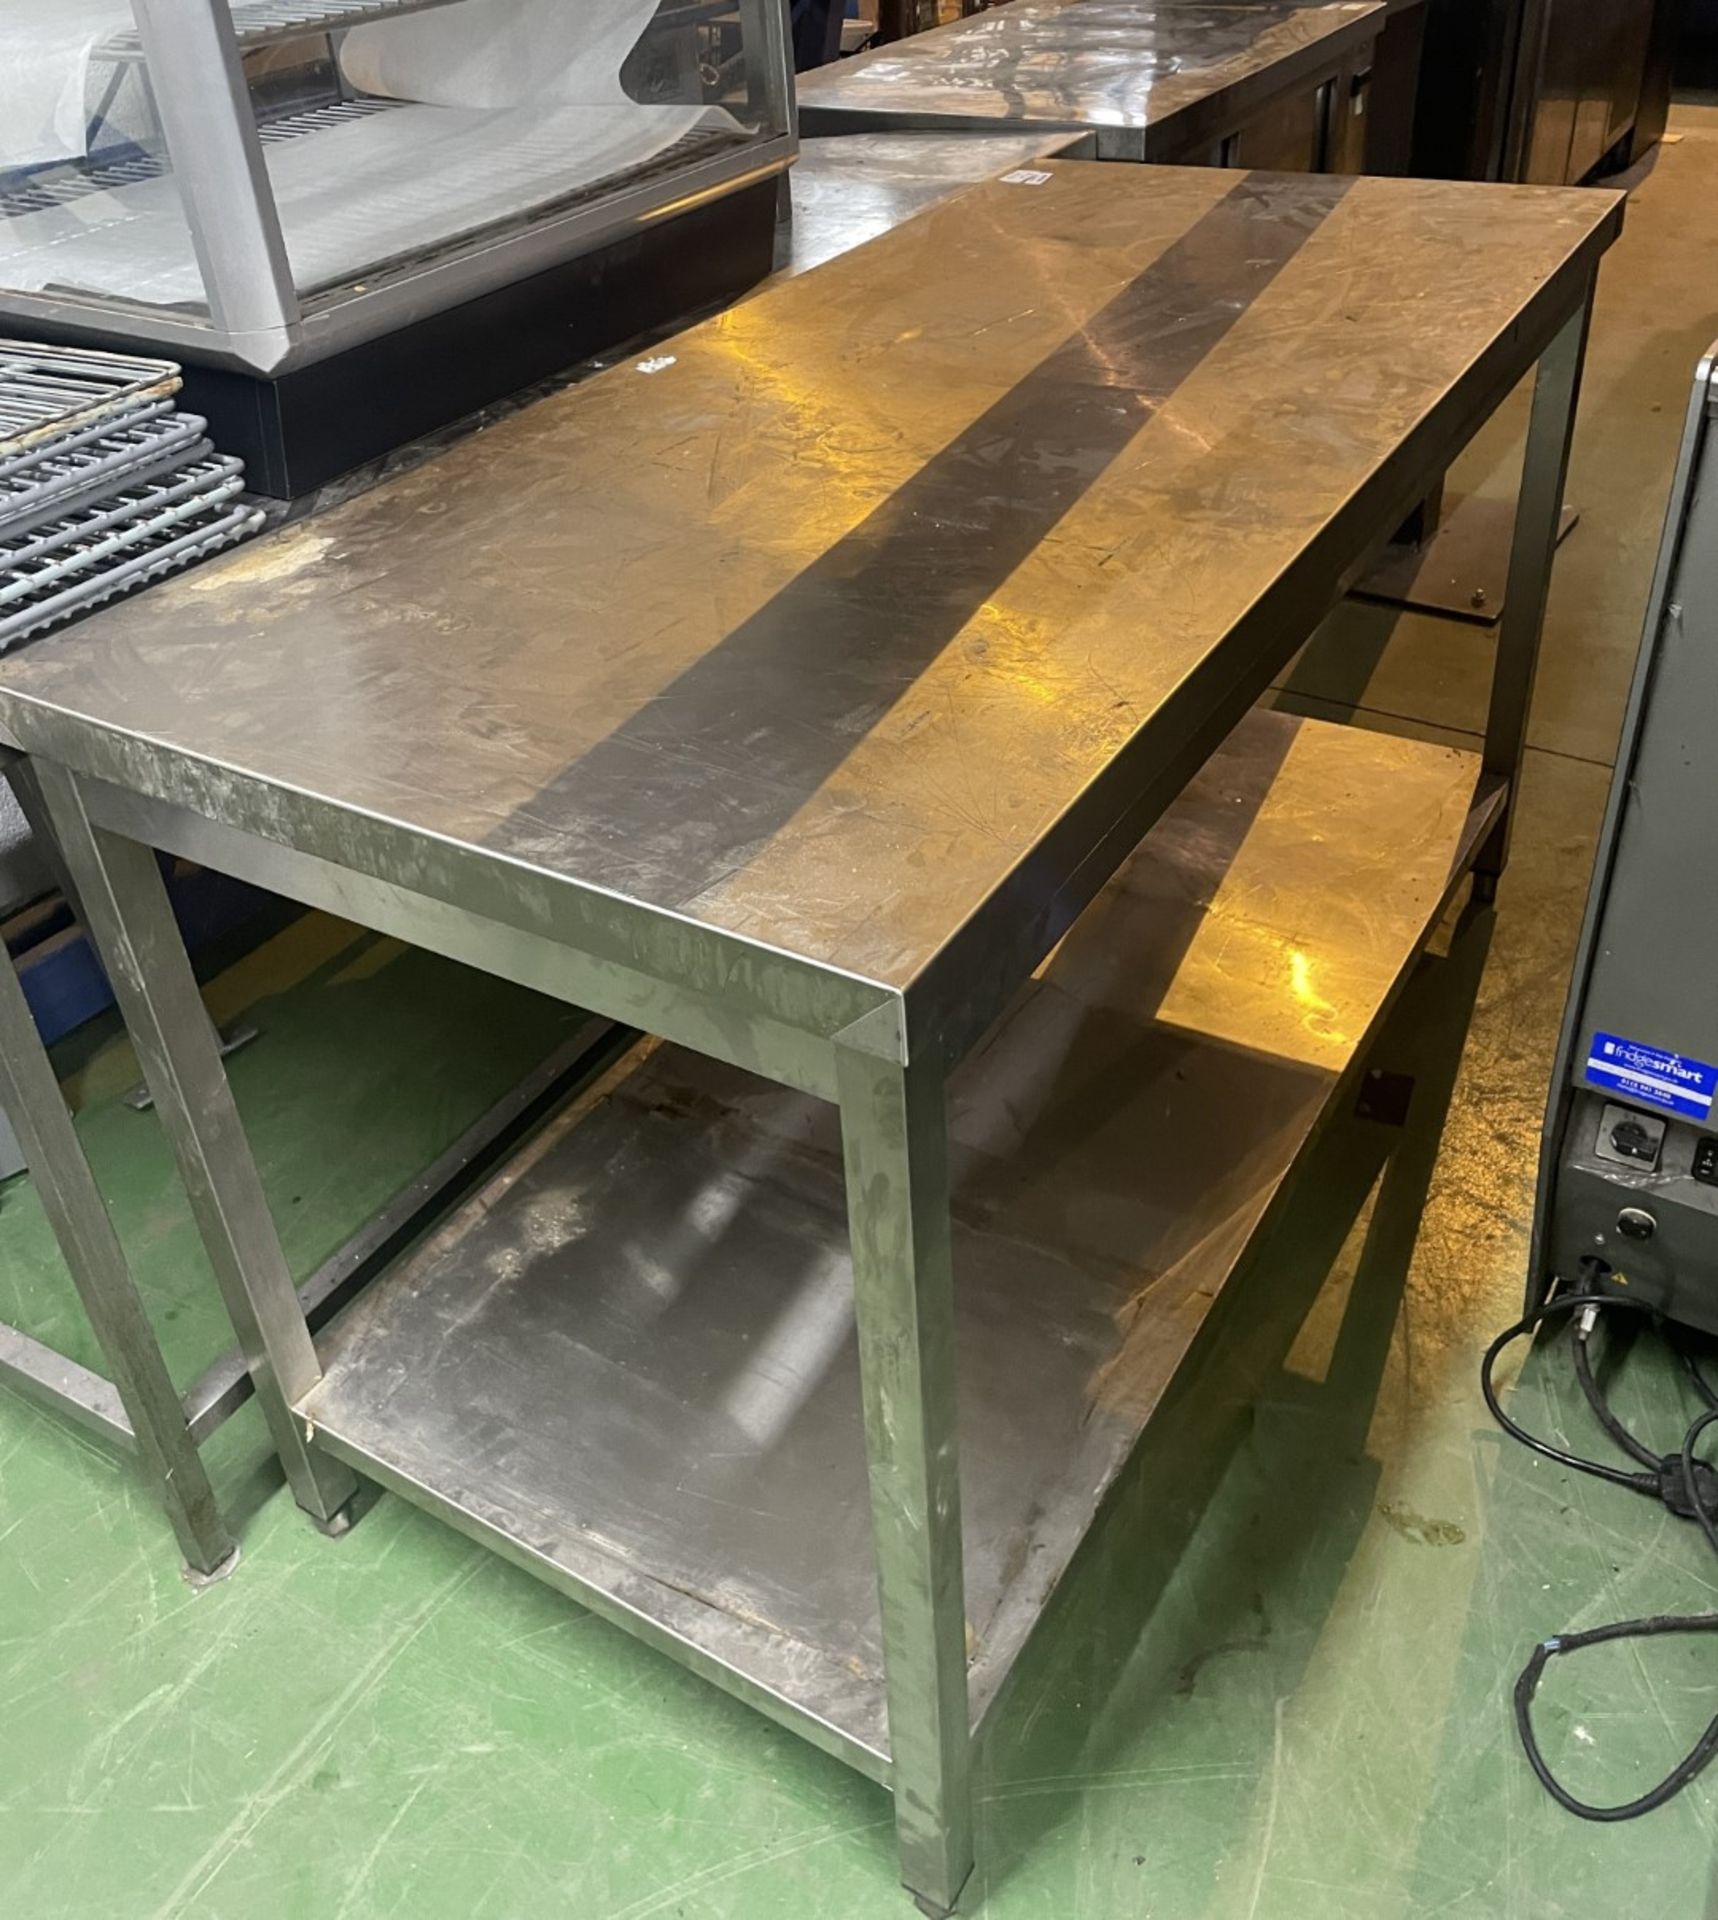 1 x Stainless Steel Prep Table With Undershelf - Image 2 of 5